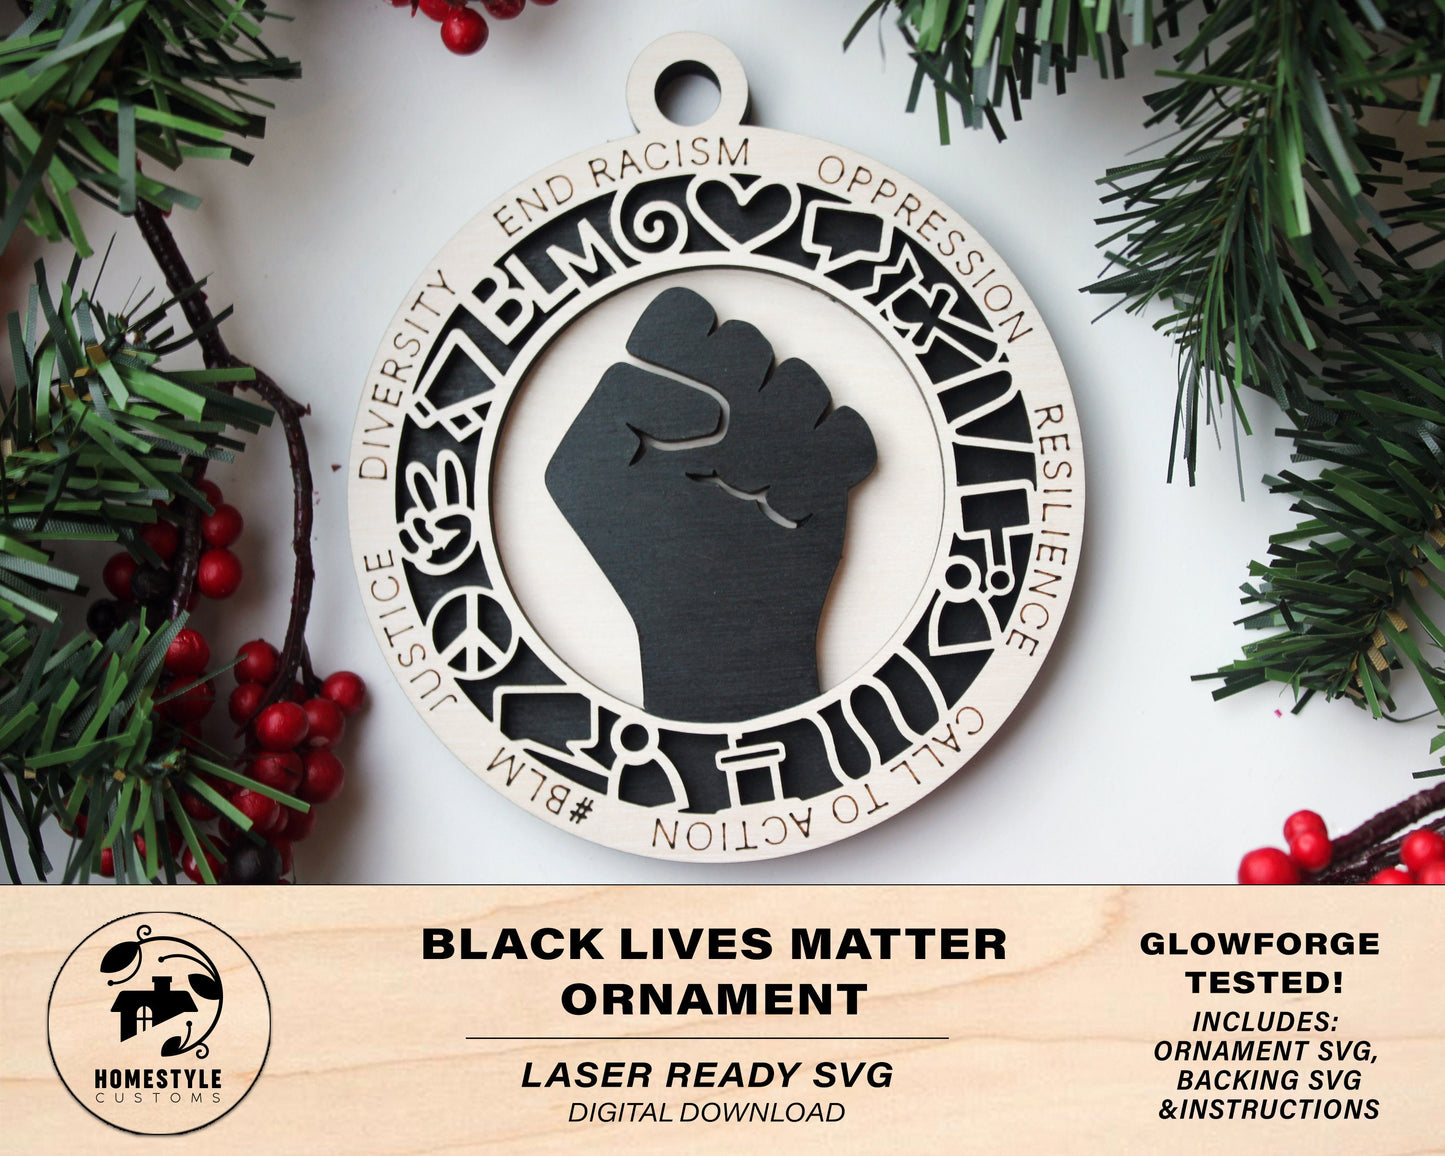 Black Lives Matter Ornament - SVG File Download - Sized for Glowforge - Christmas BLM